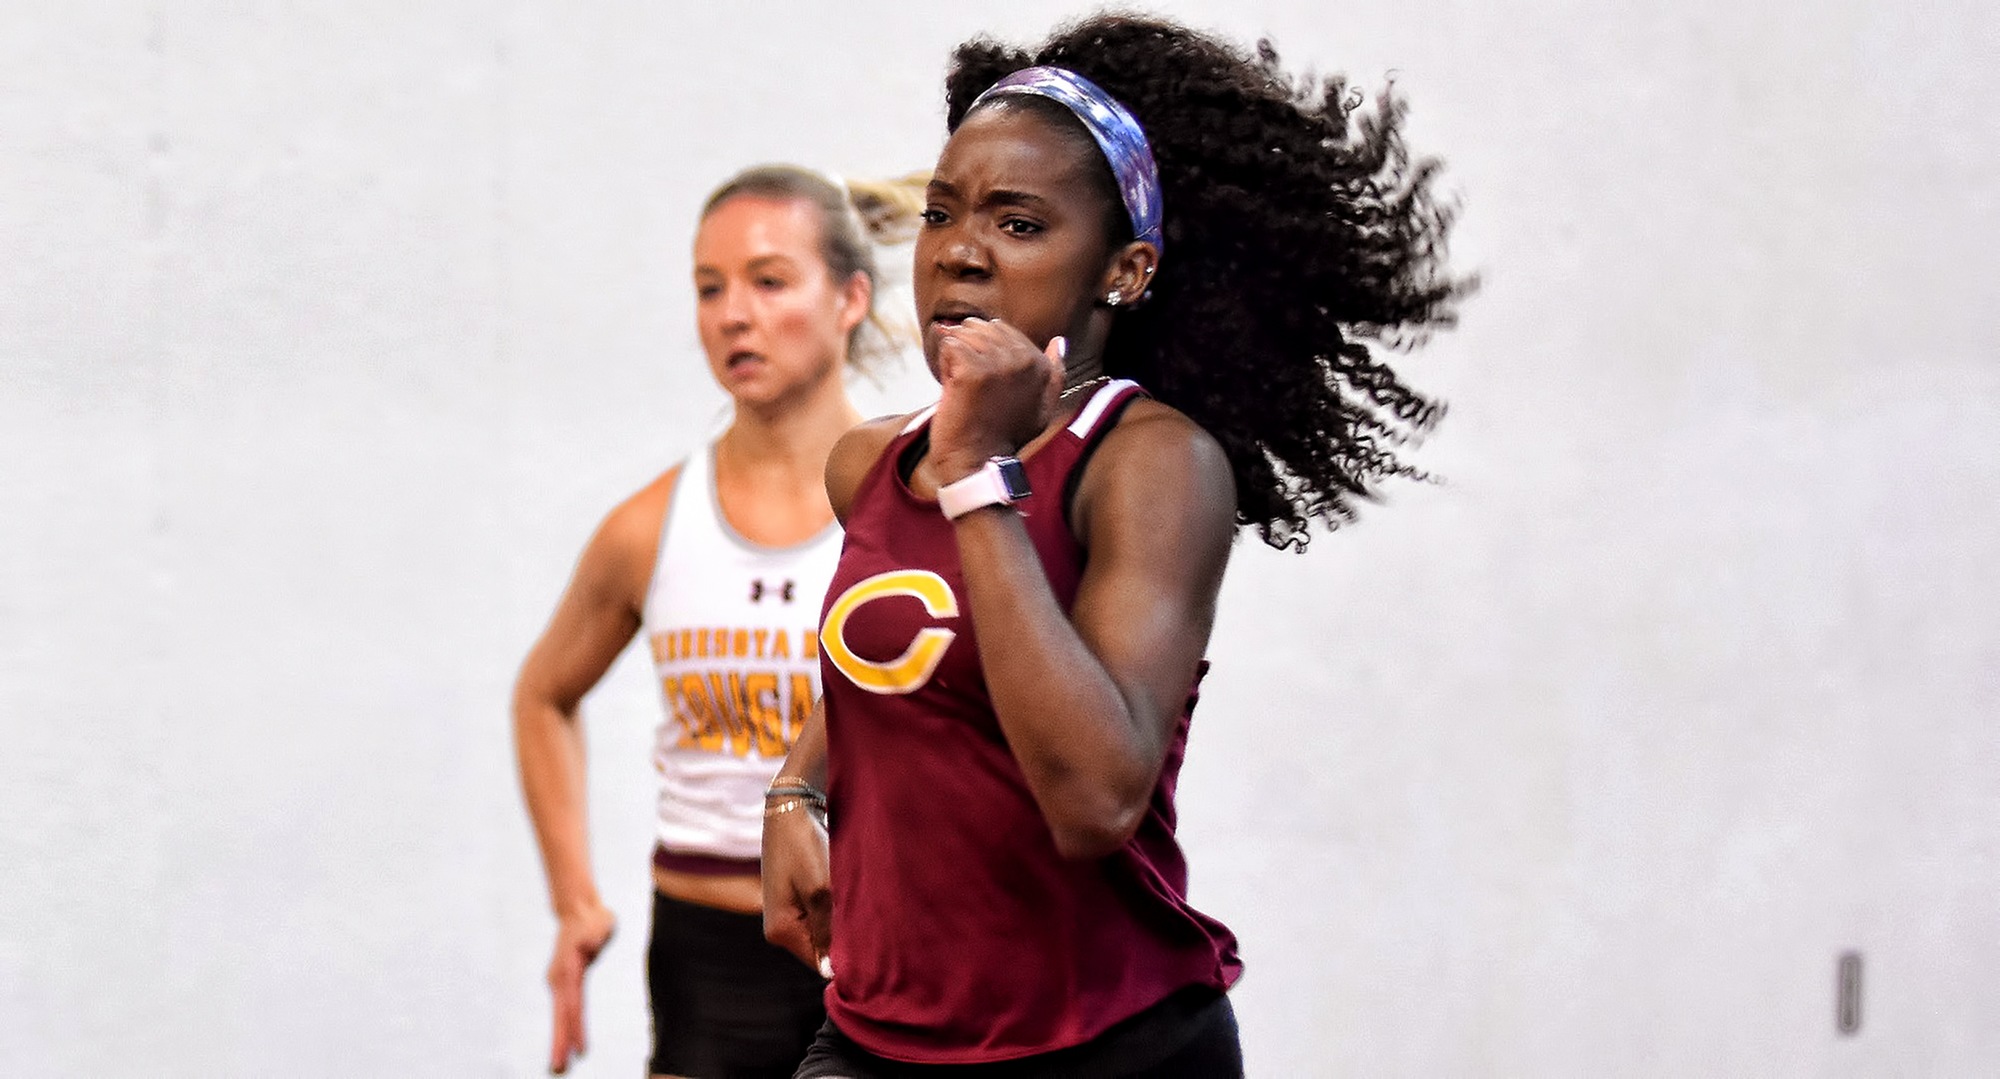 Senior Zahra Banks won the 60-meter dash at the St. Benedict Invite with the fifth fastest time in school history. Her event win helped the Cobbers claim the team championship.